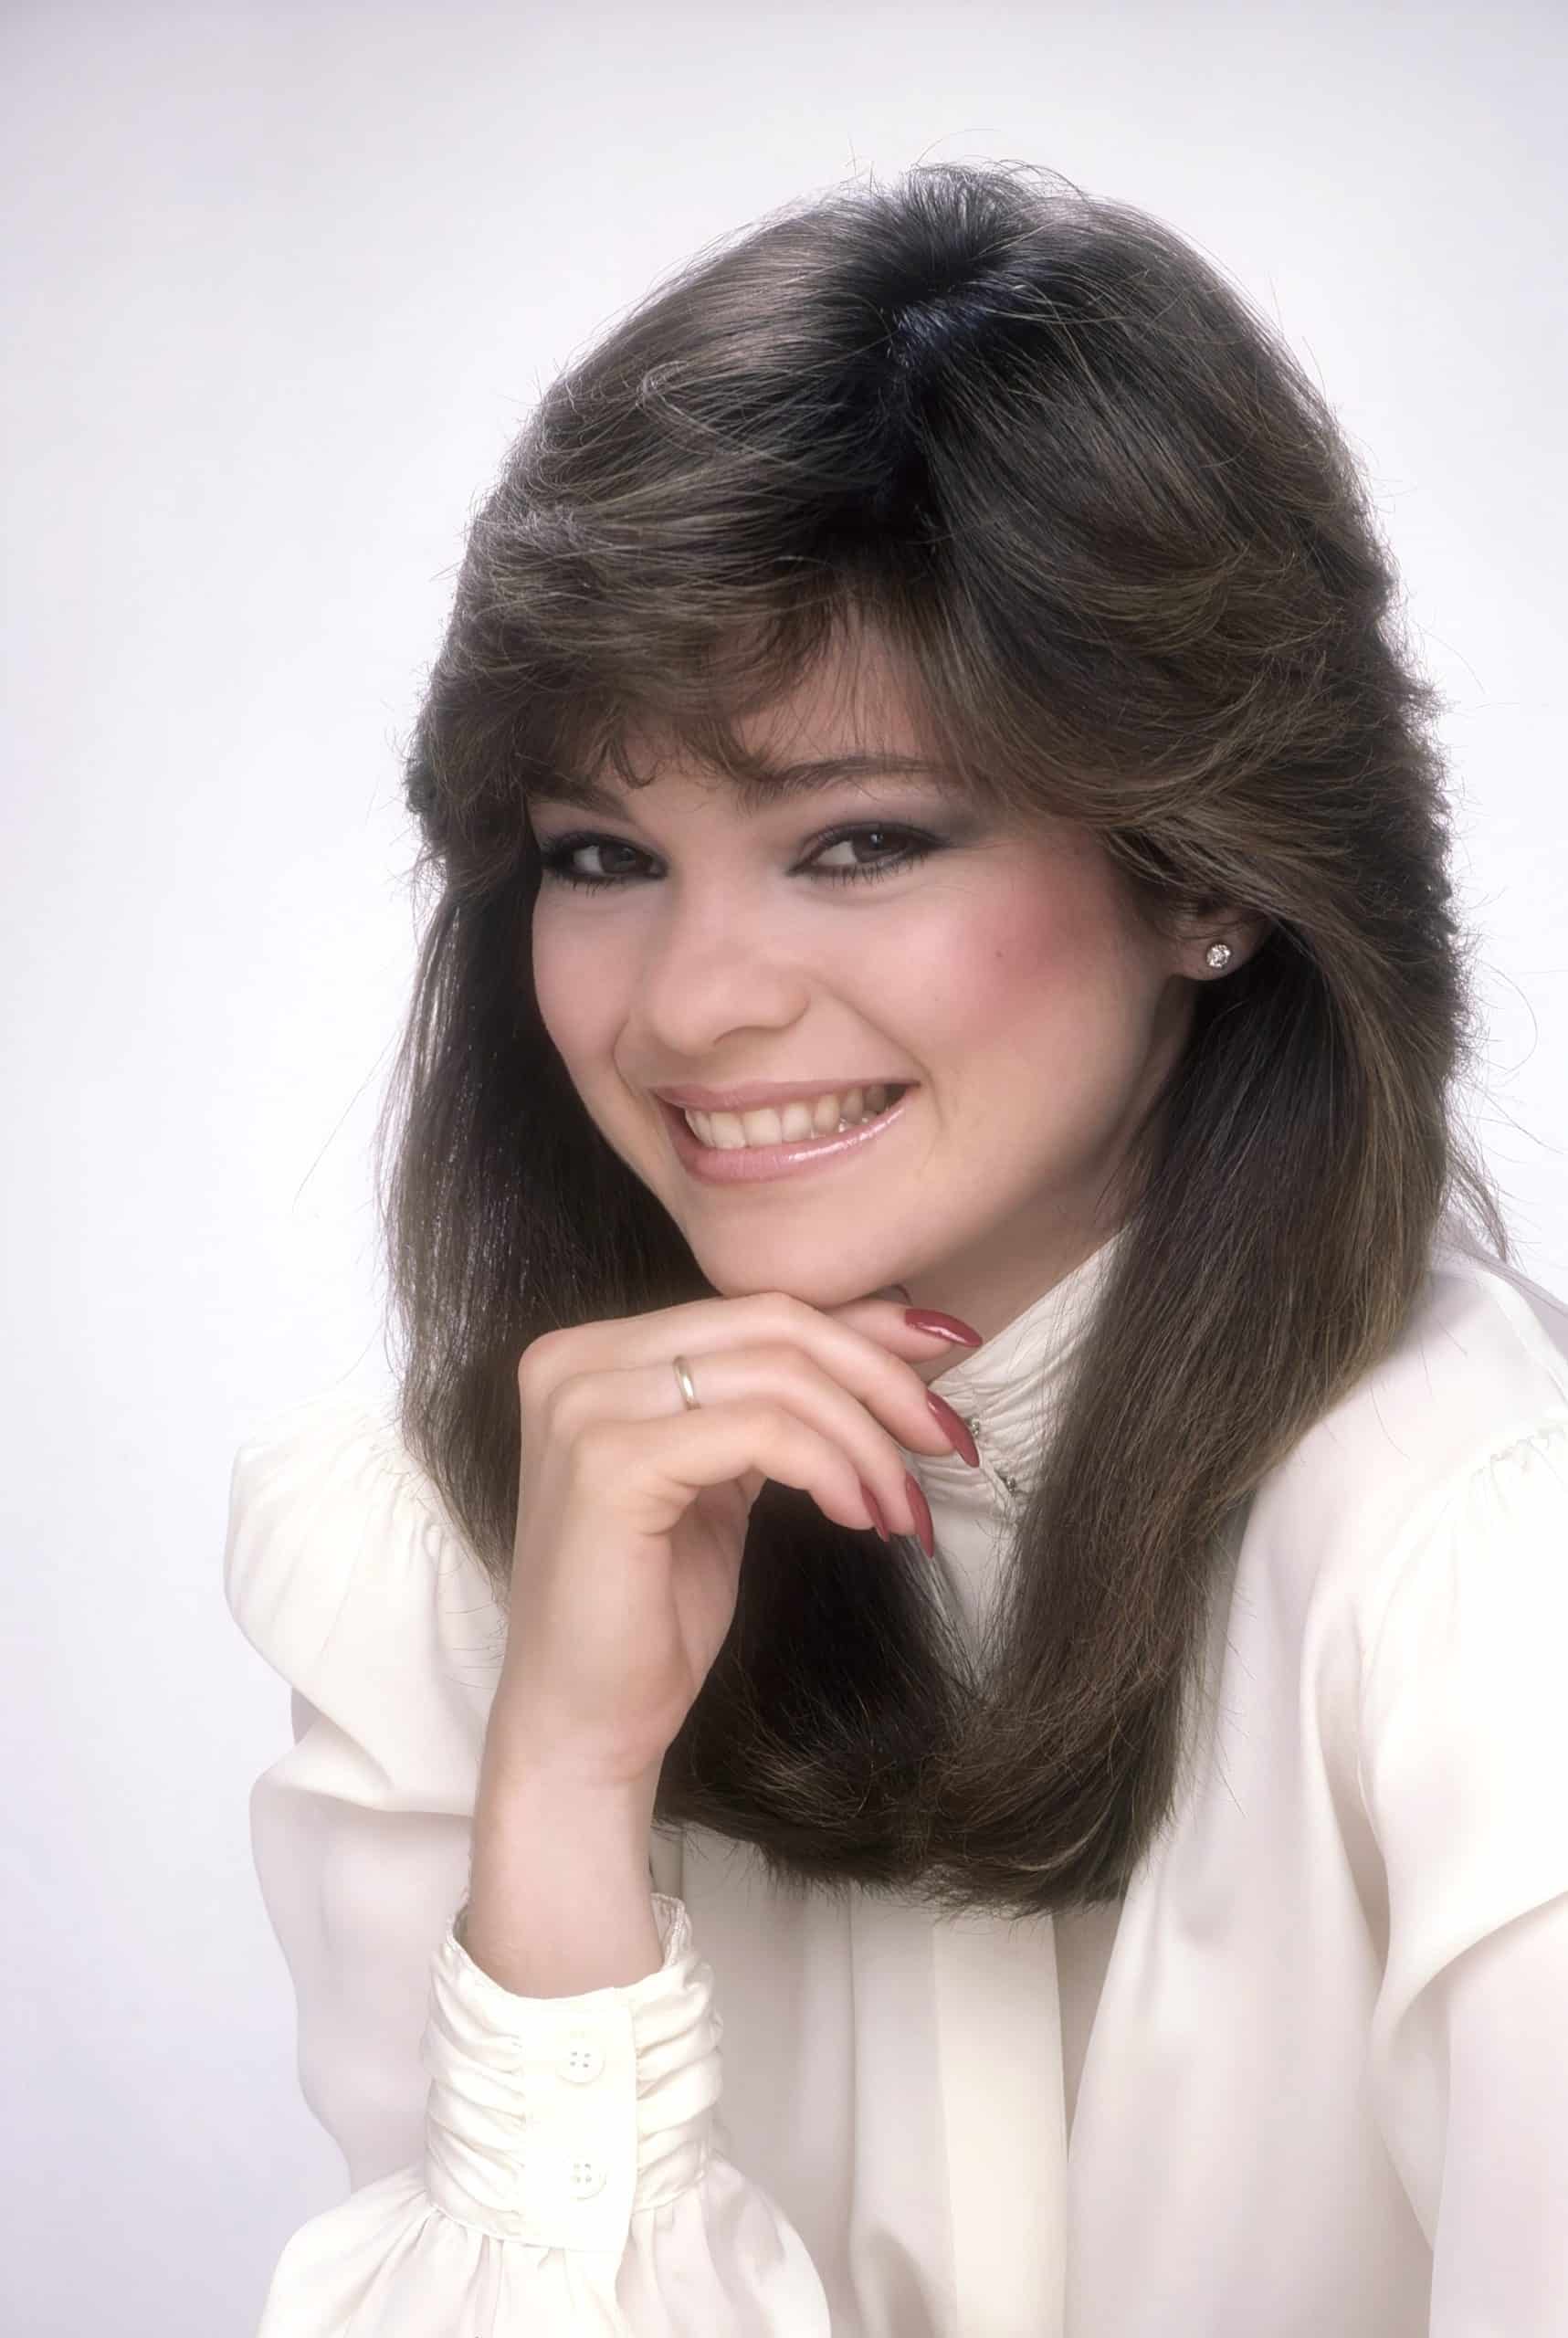 Valerie Bertinelli of ONE DAY AT A TIME, 1982